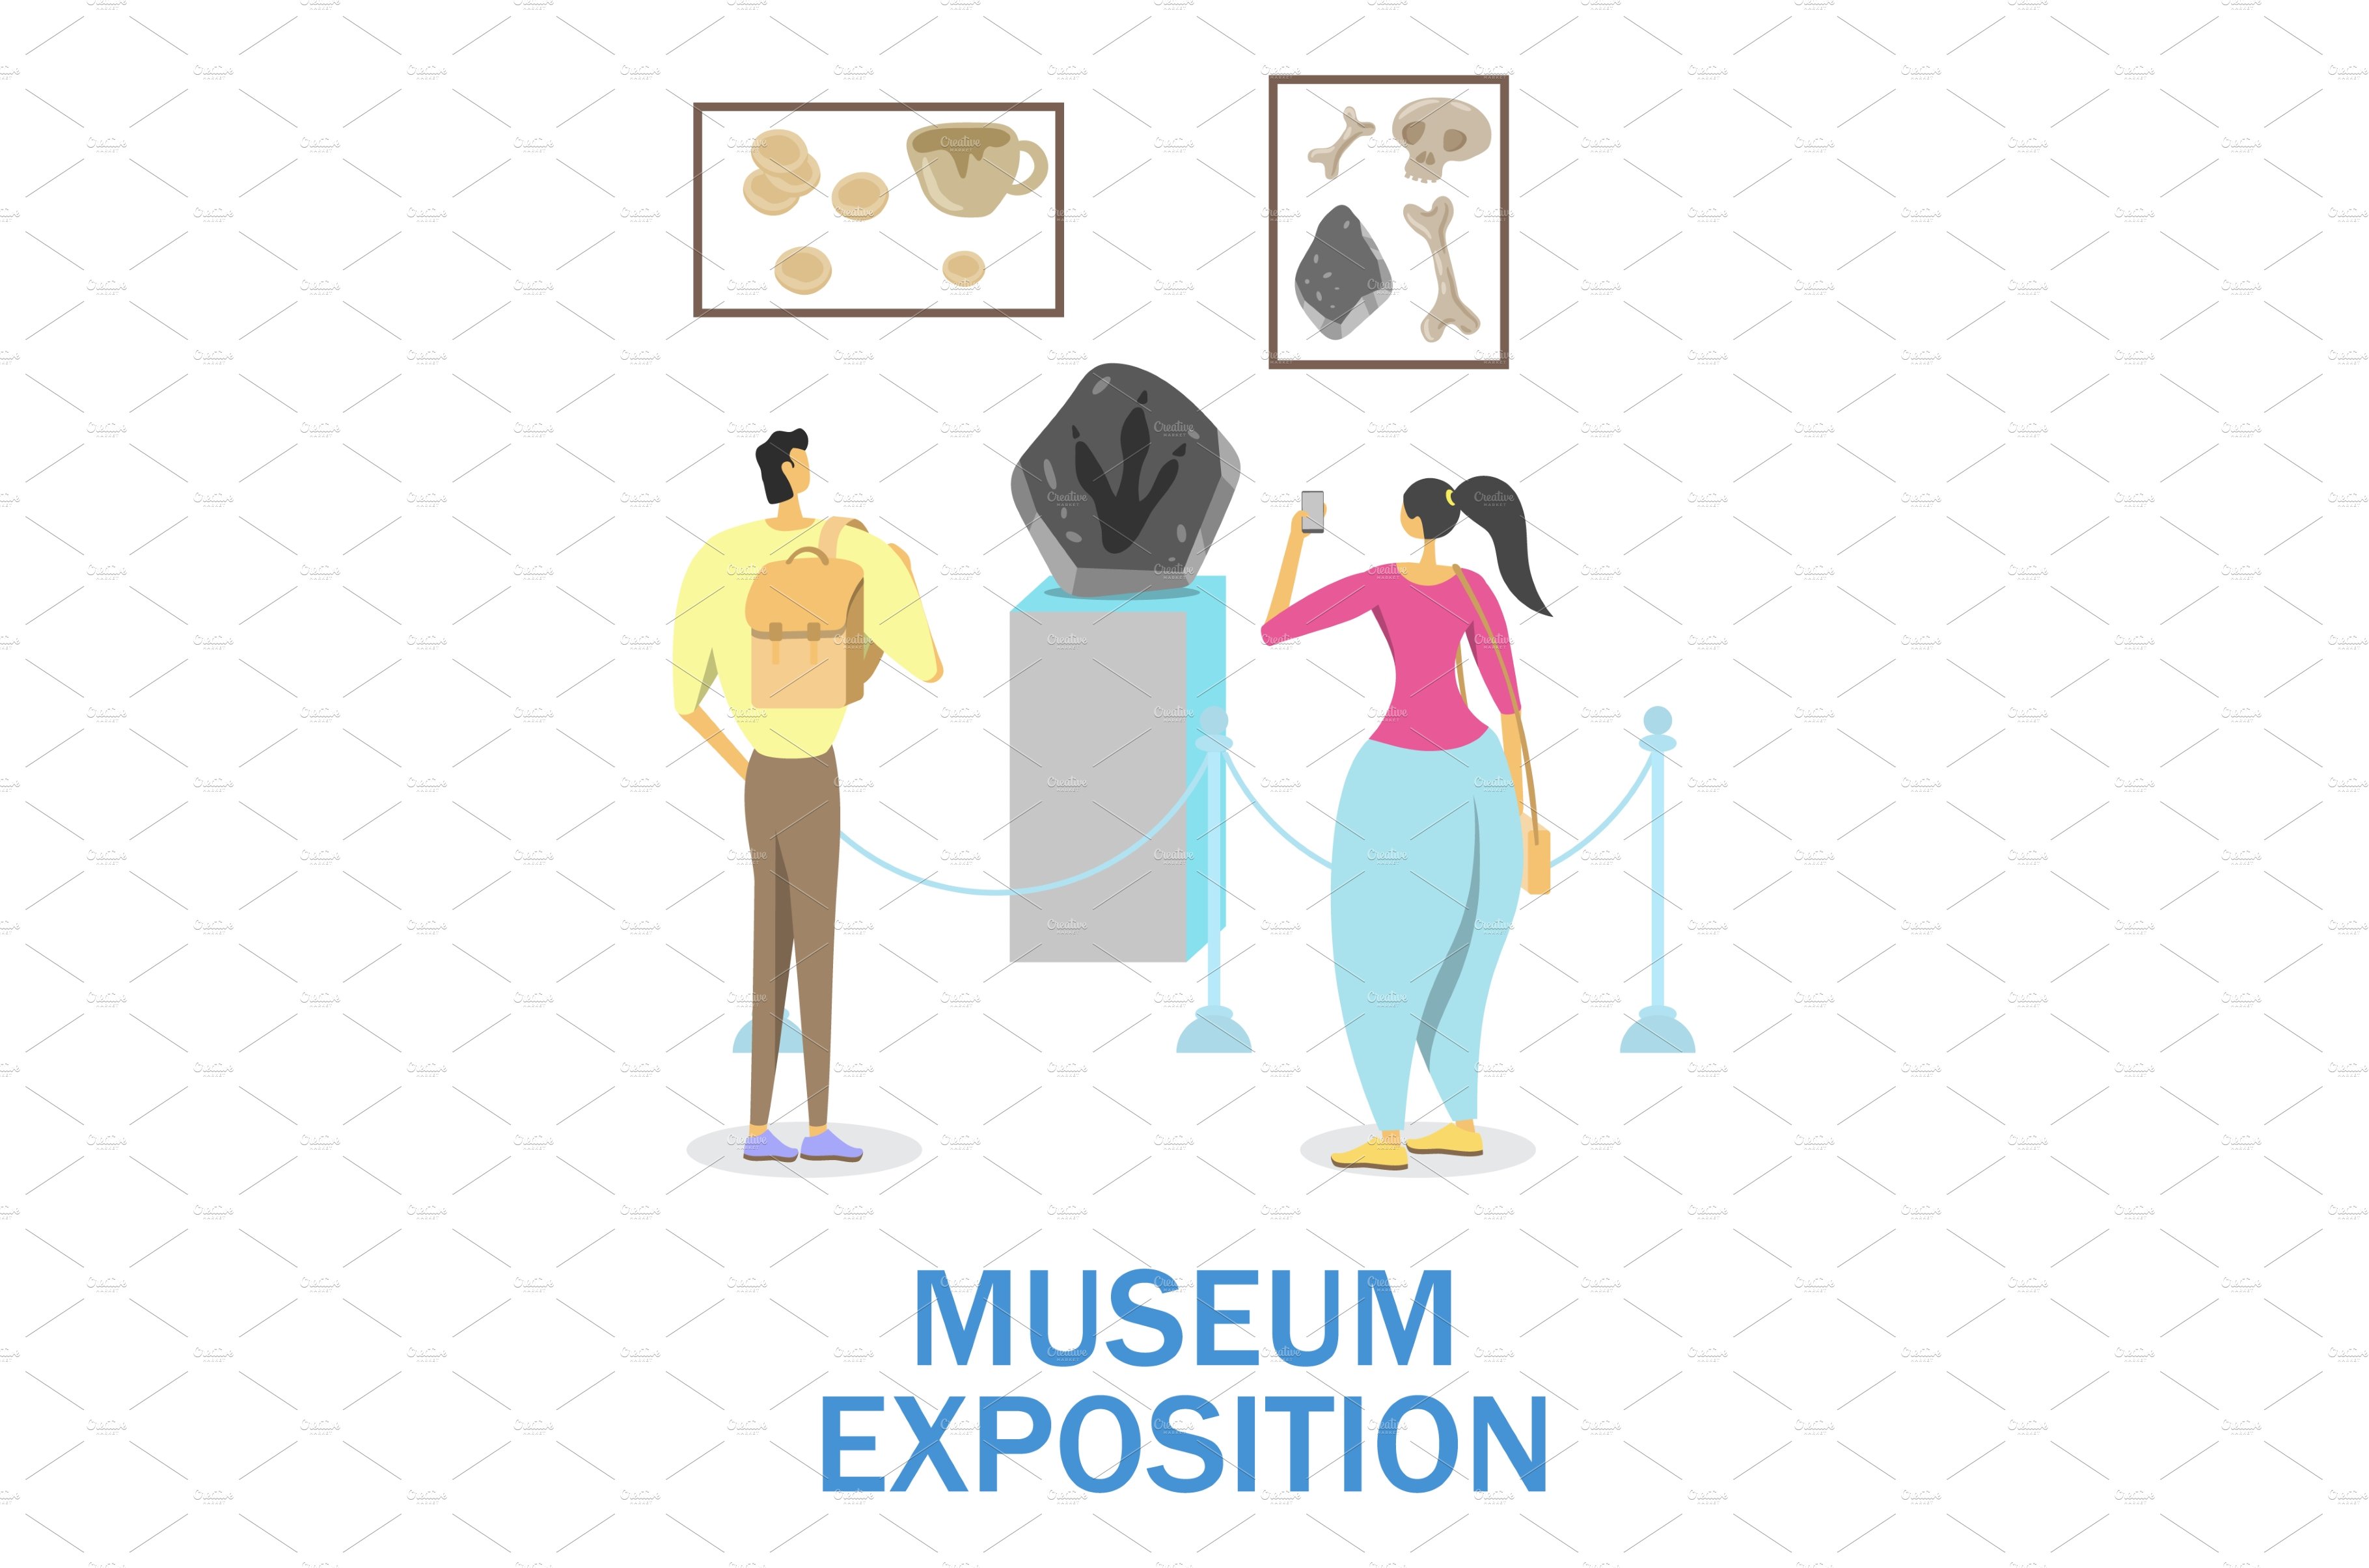 History museum exposition, vector cover image.